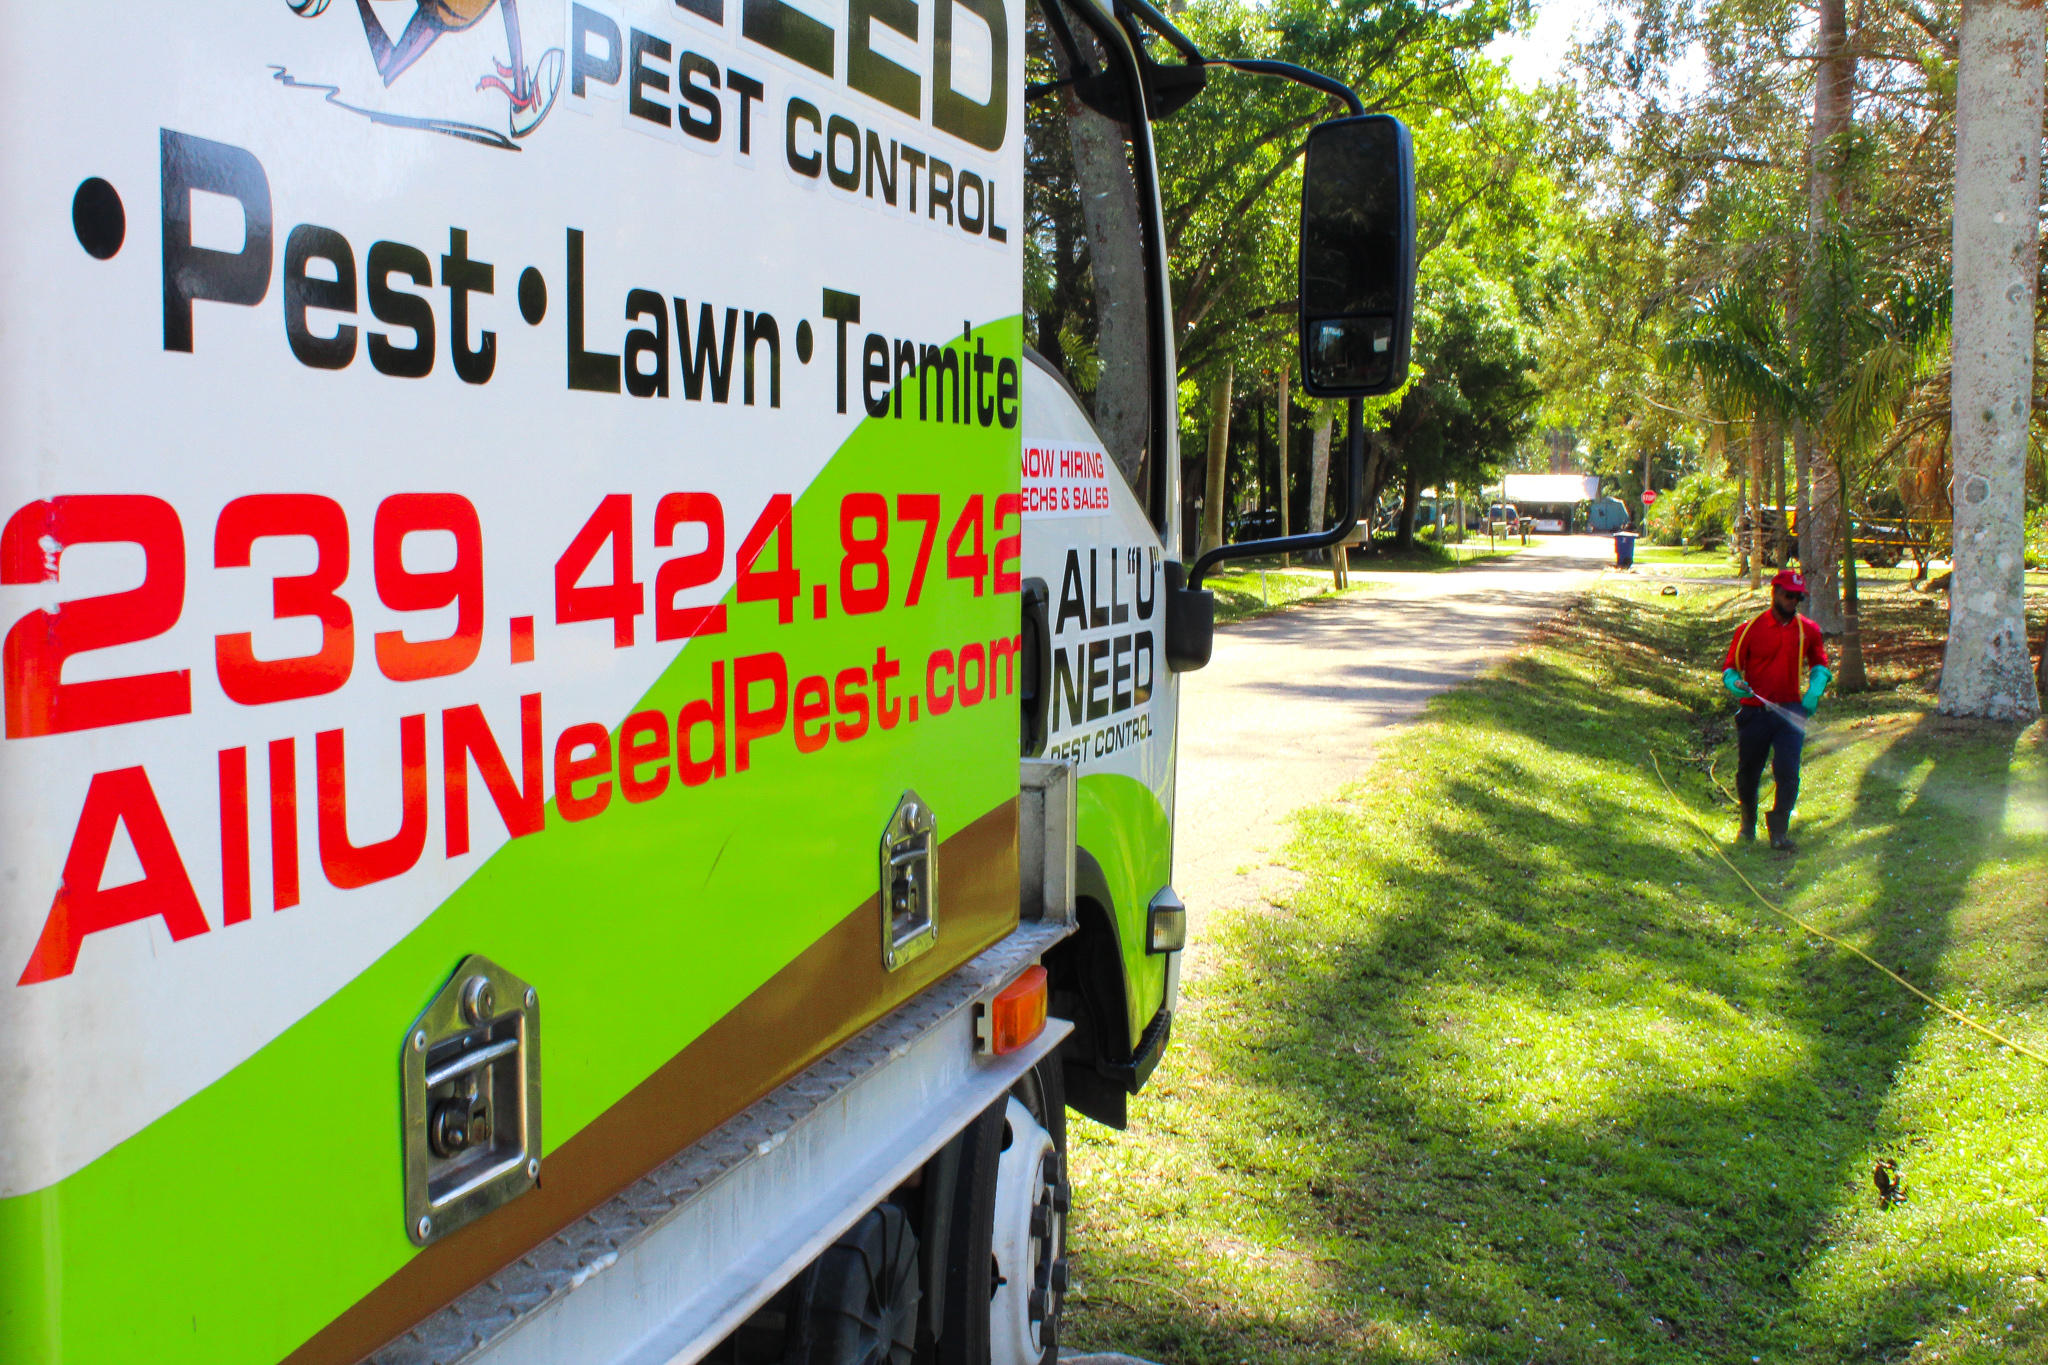 From the biggest yards to the smallest, we have the newest tools and capabilities to tackle any lawncare service. If you are looking for a weed free, pest free and a lush and healthy lawn, call us today to learn more!